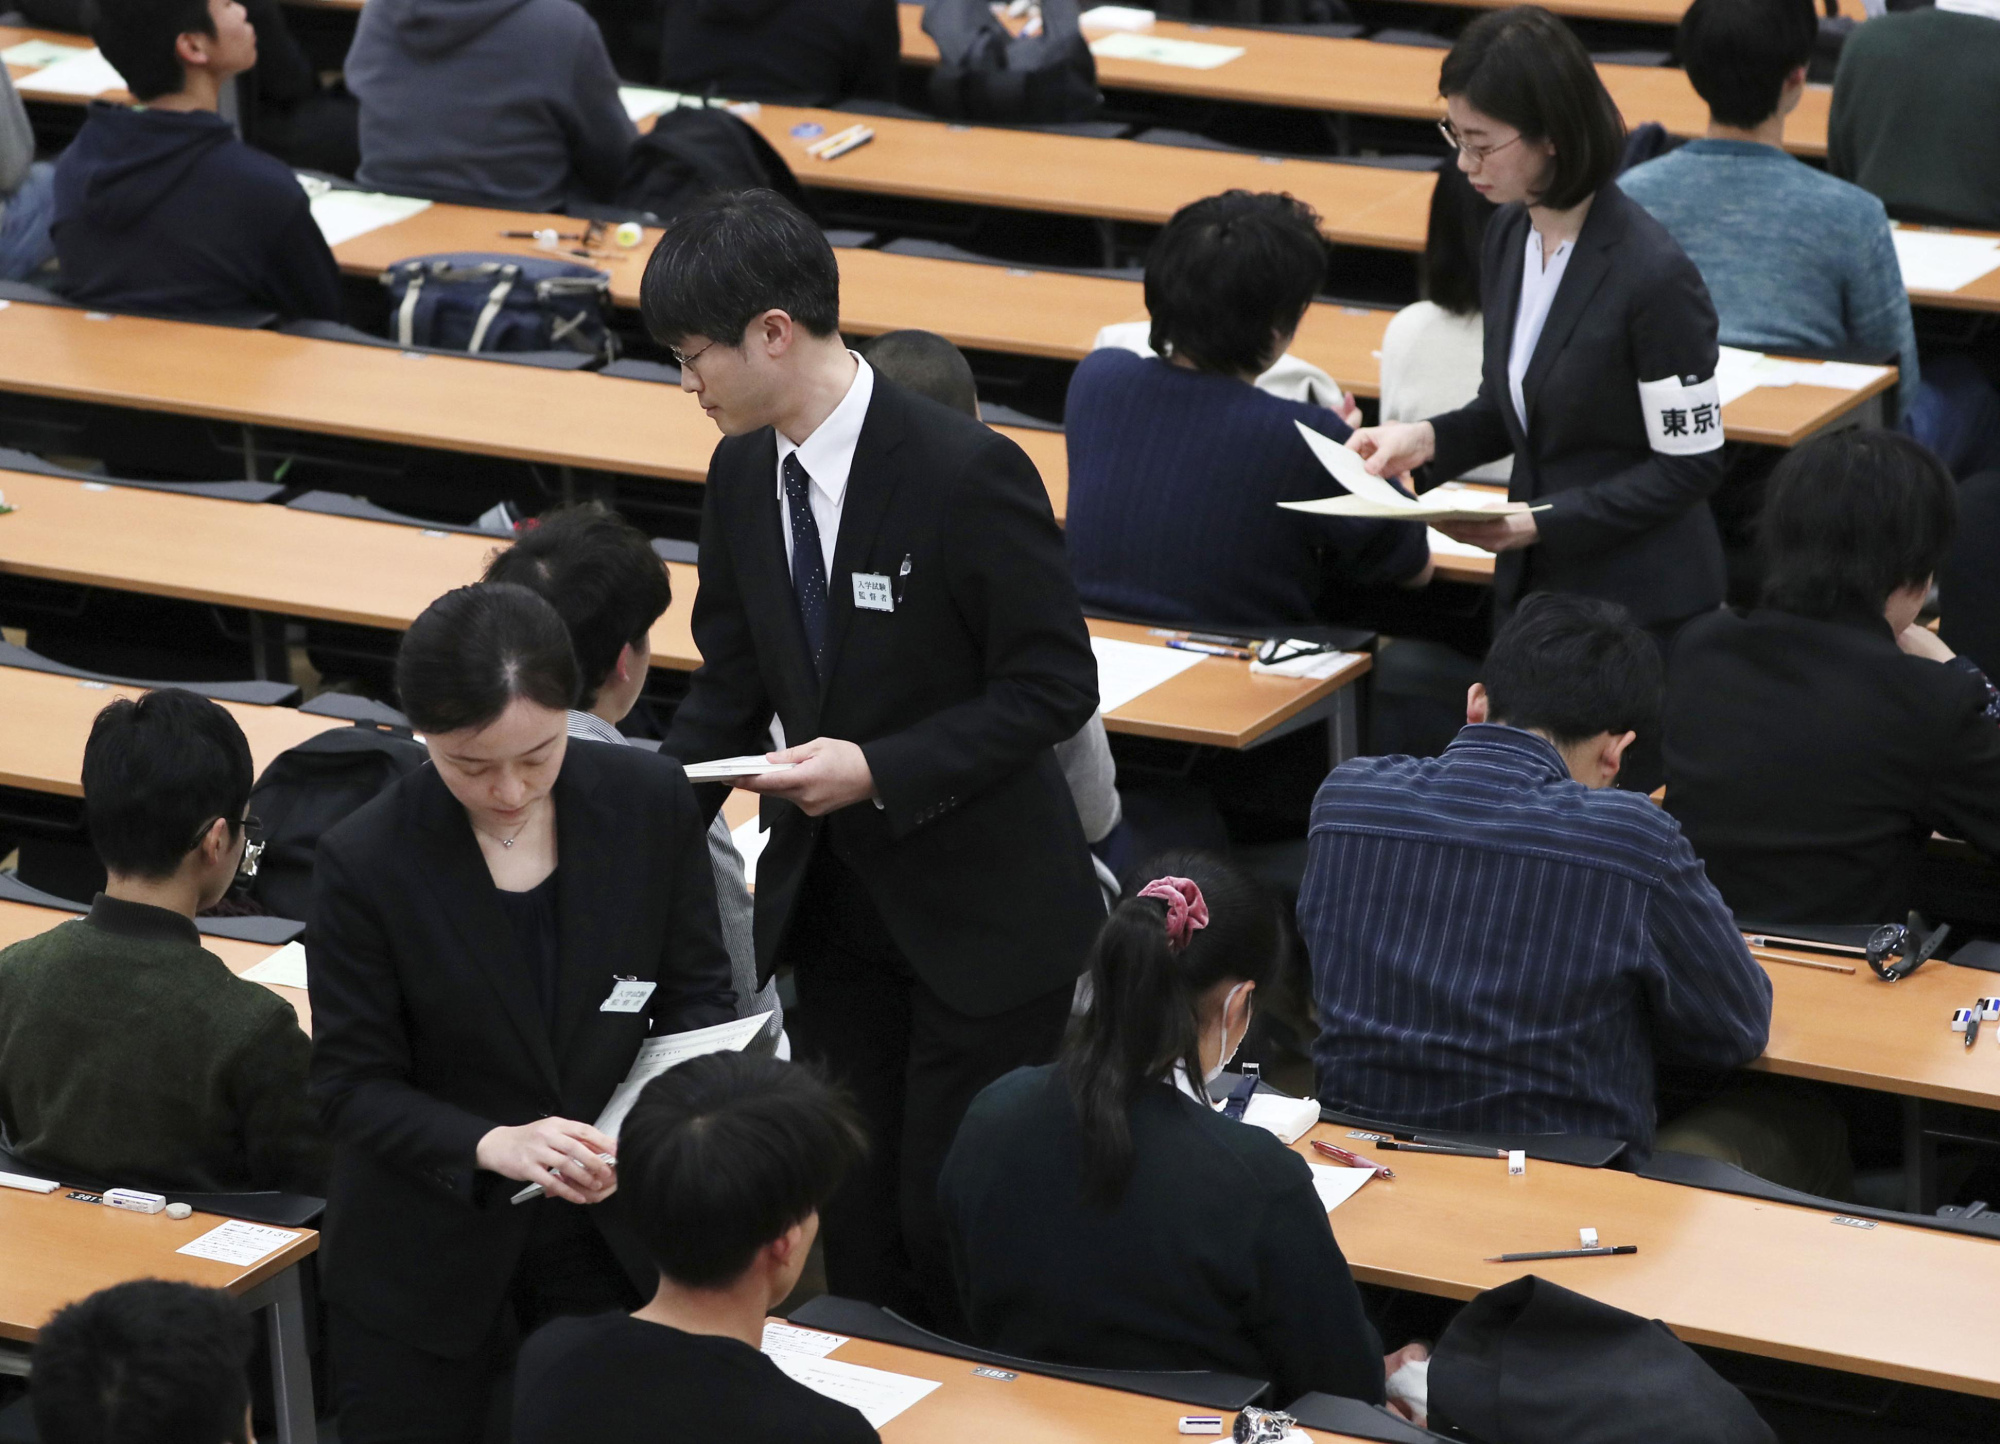 Annual unified college entrance examinations are held at the University of Tokyo on Jan. 18, ahead of the entrance exam season for universities nationwide. | POOL / VIA KYODO